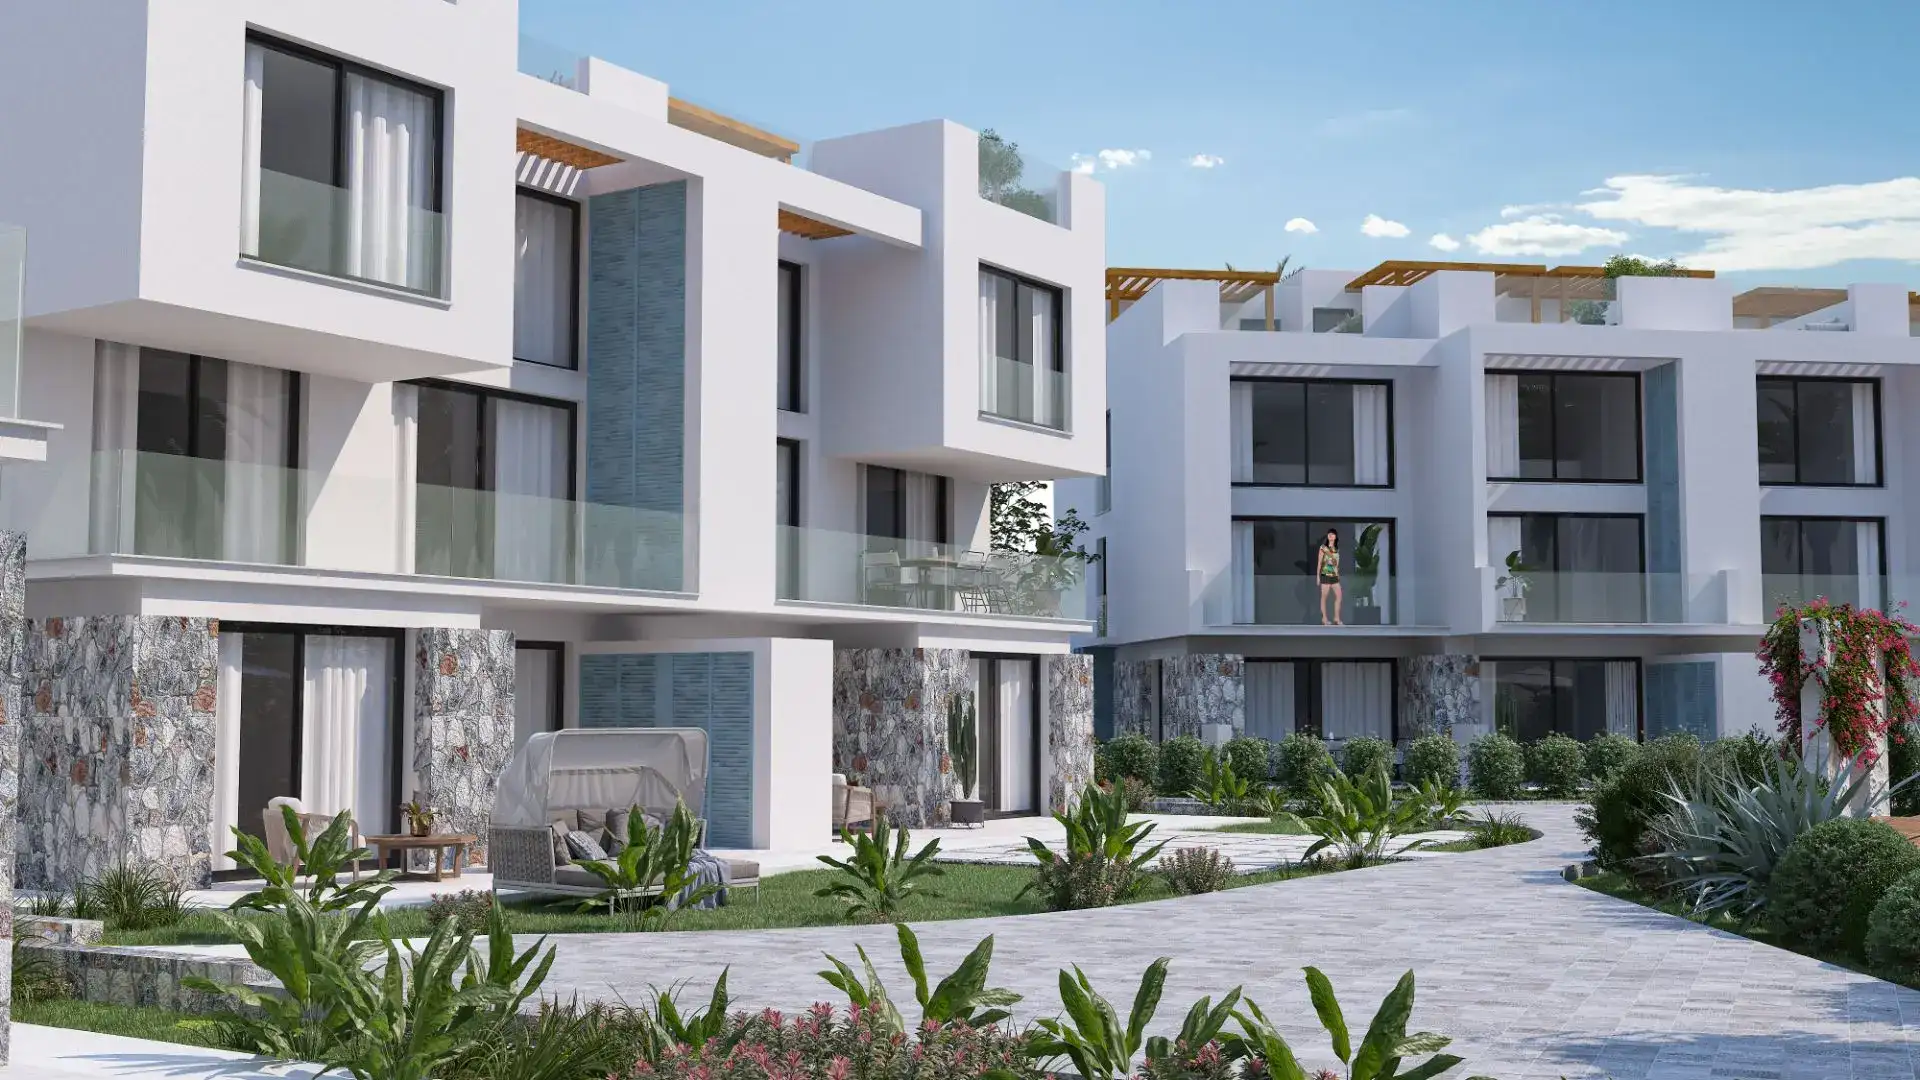 NEW LUXURY APARTMENT PROJECT IN NORTHERN CYPRUS